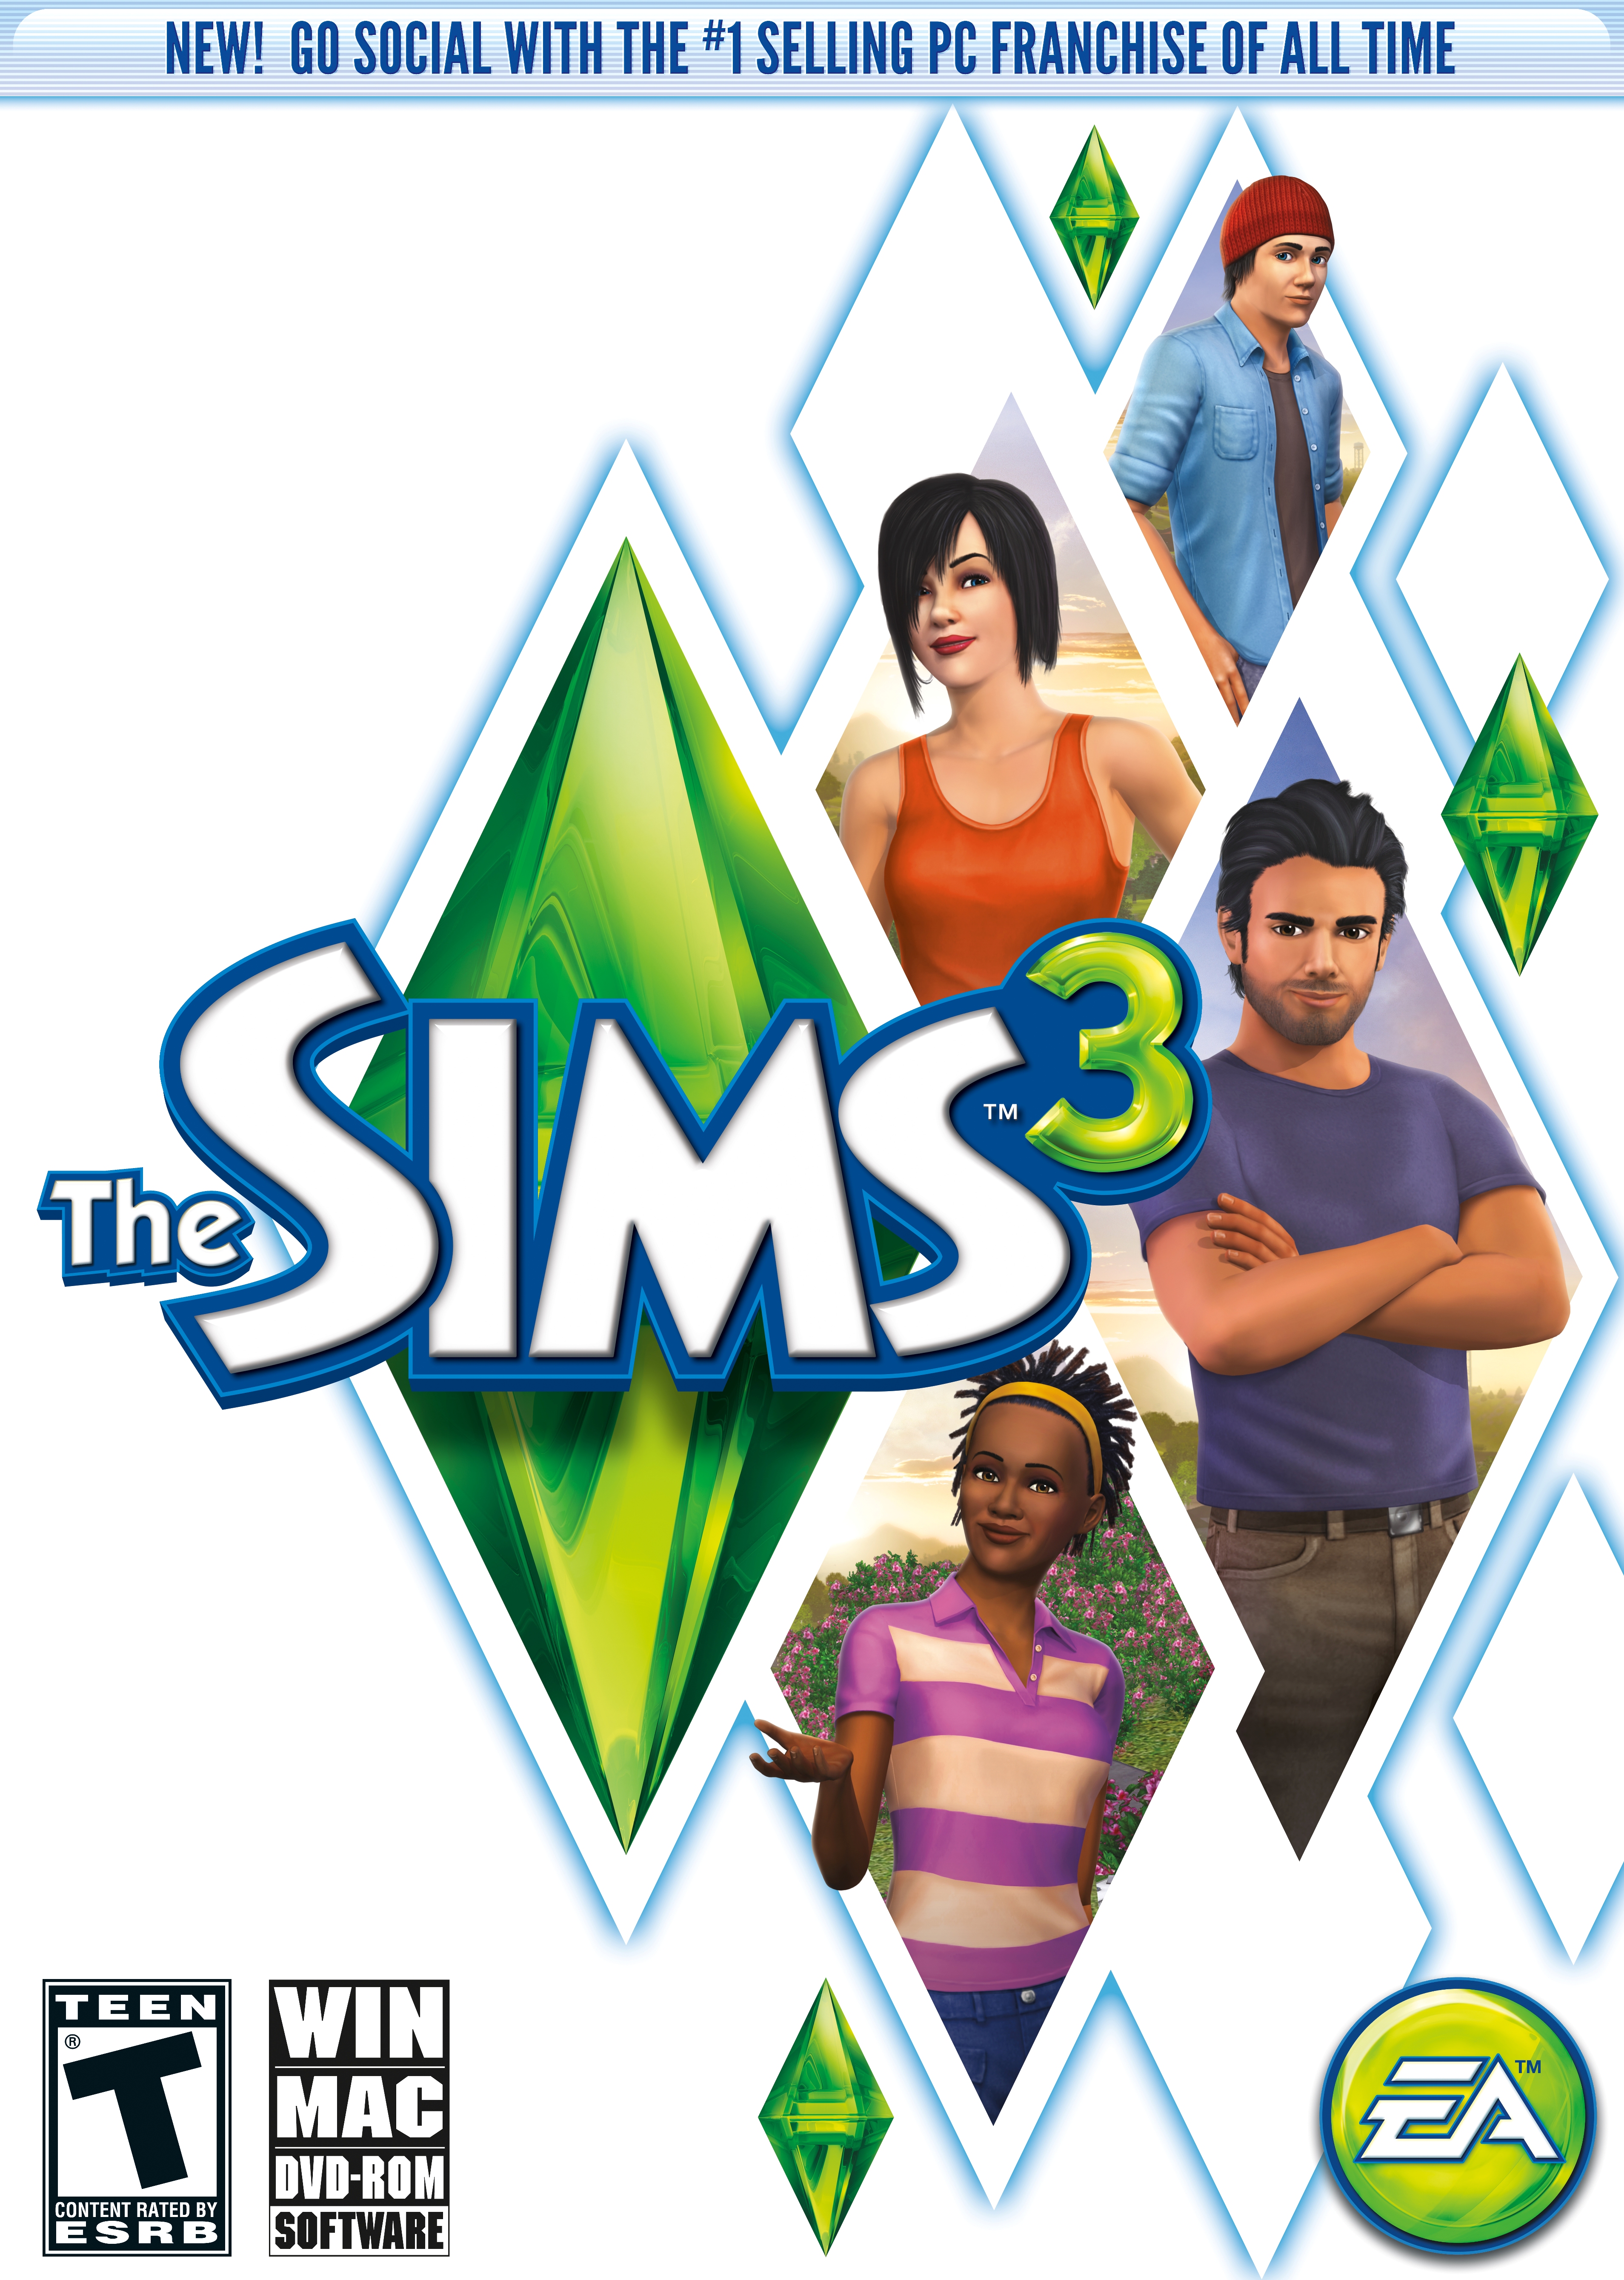 sims 3 plus all expansions